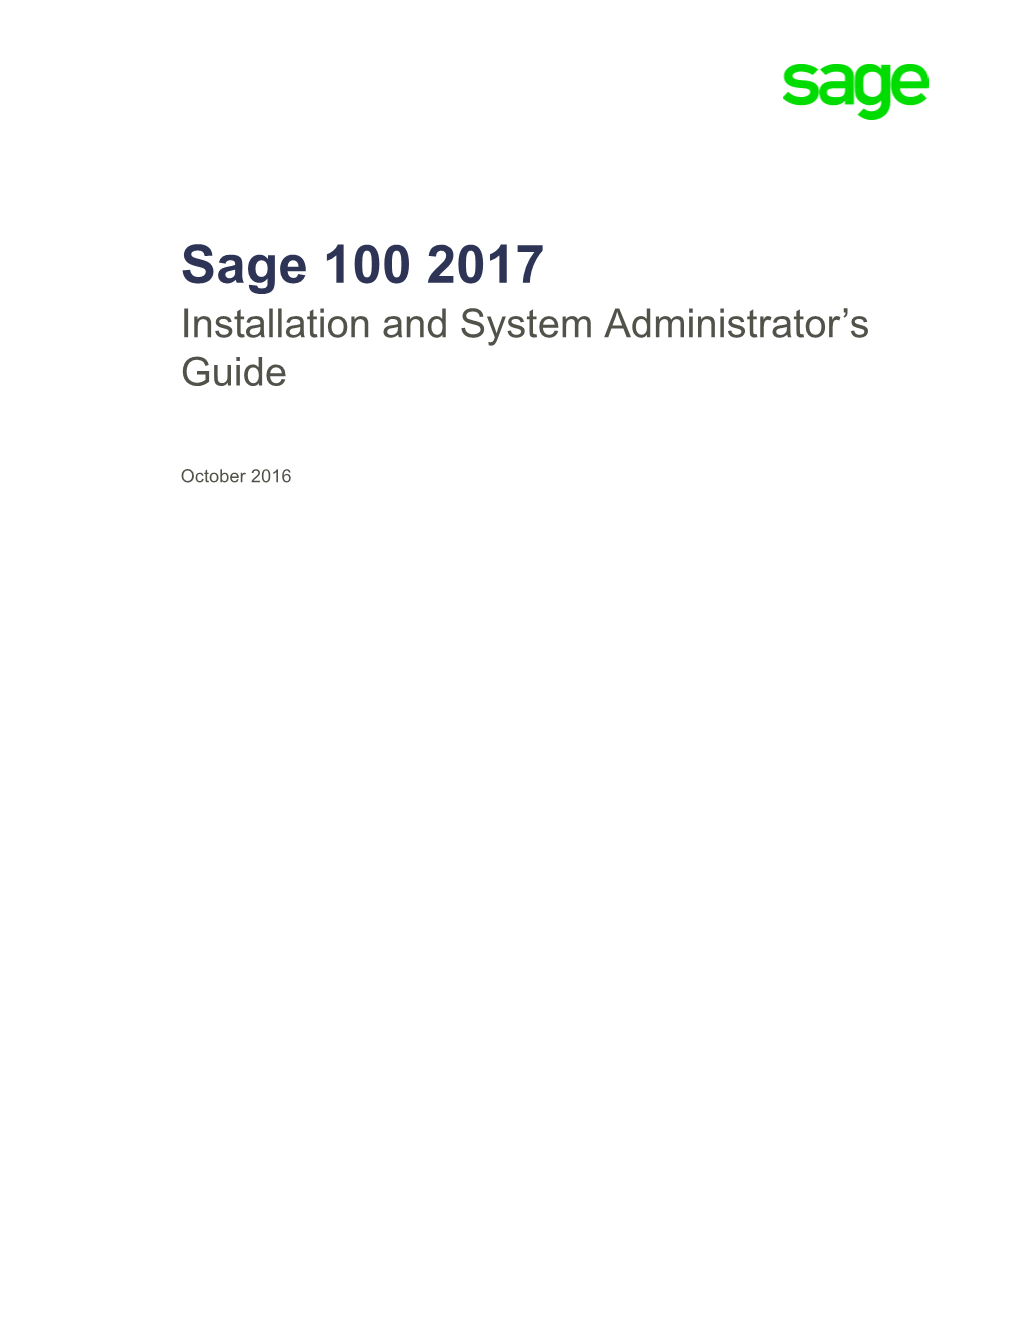 Sage 100 2017 Installation and System Administrator's Guide